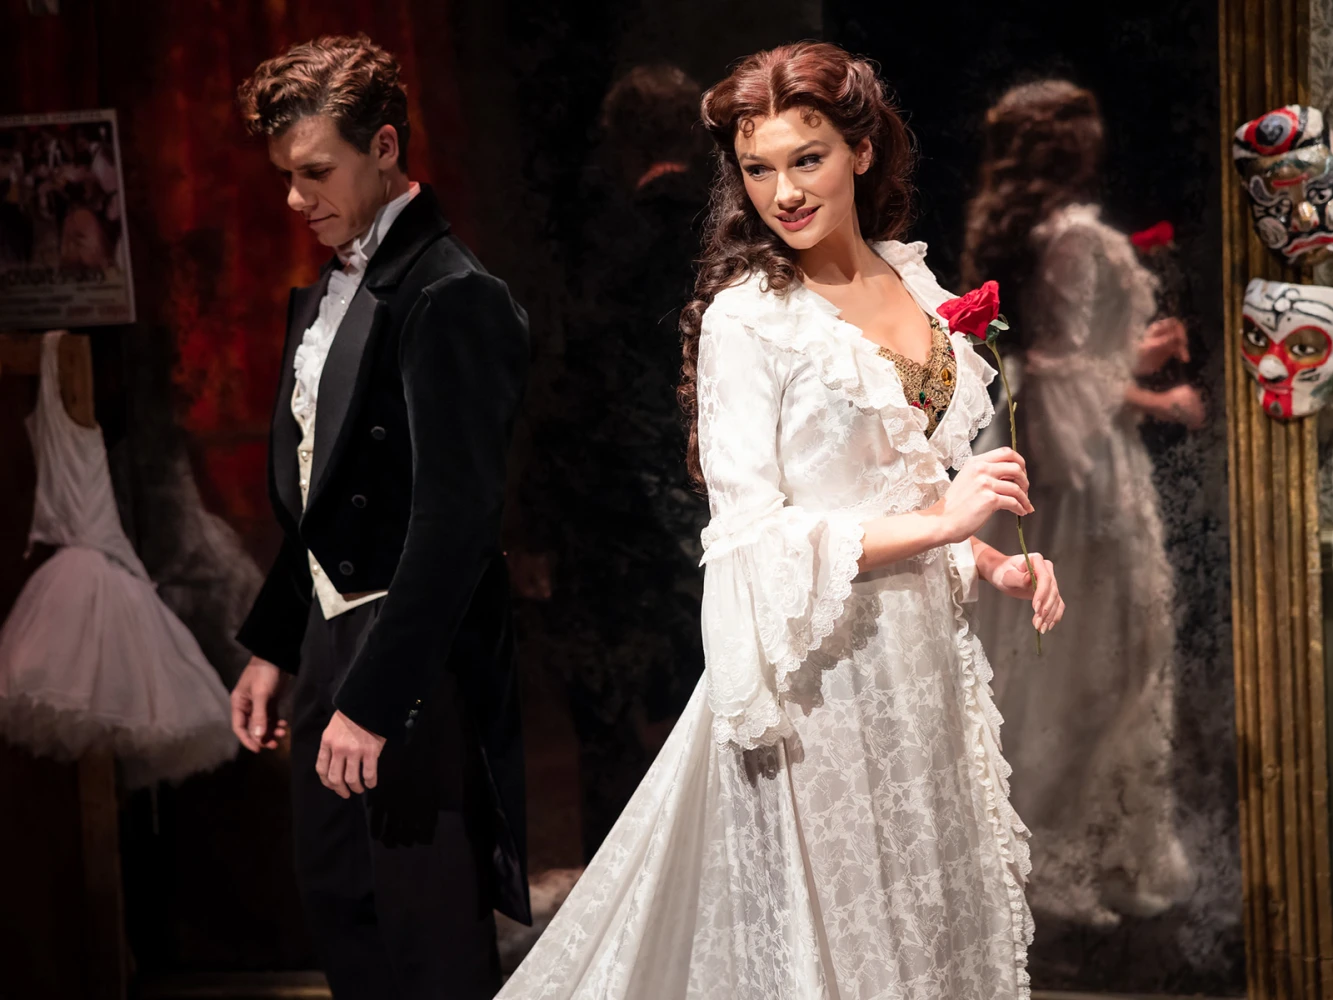 The Phantom of the Opera: What to expect - 3